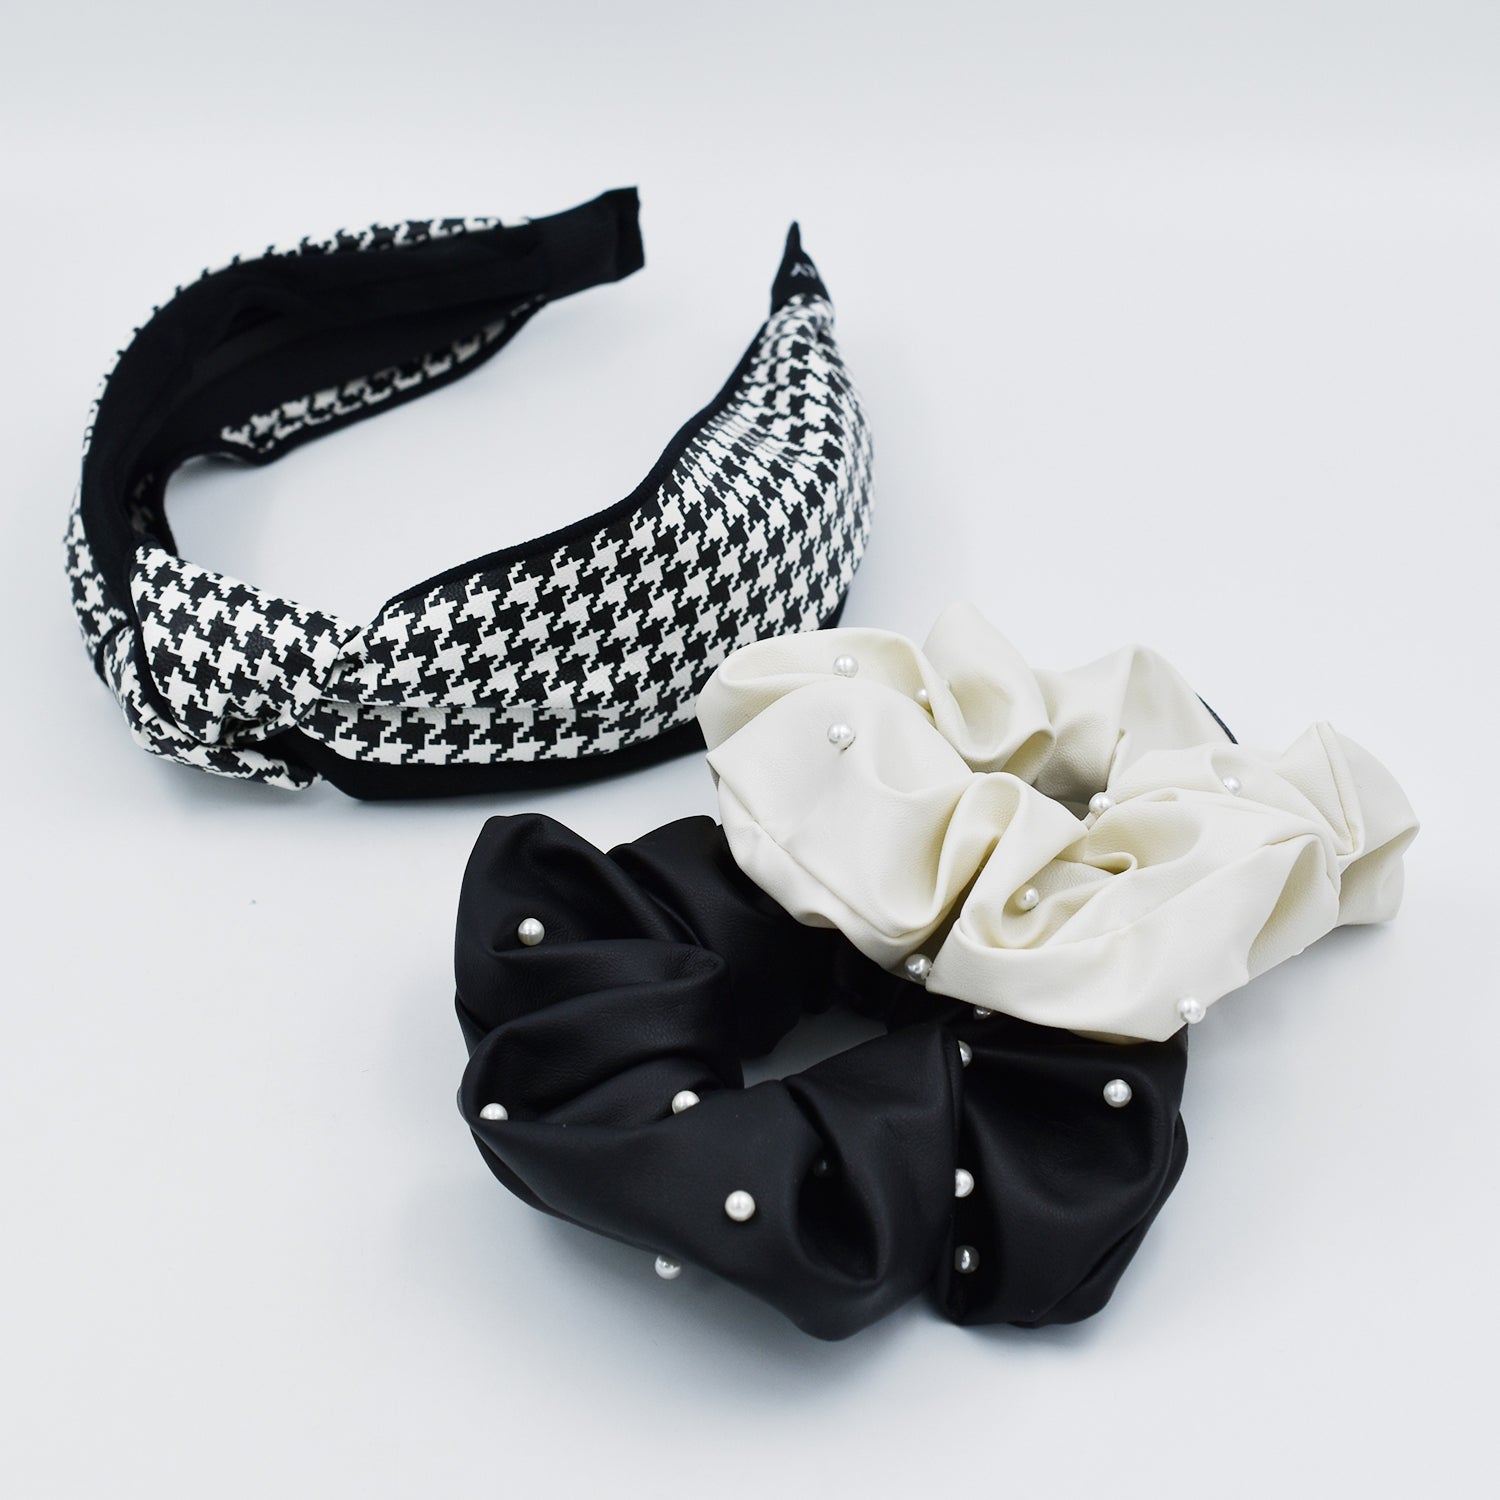 HOUNDSTOOTH CHECK HAIRBAND